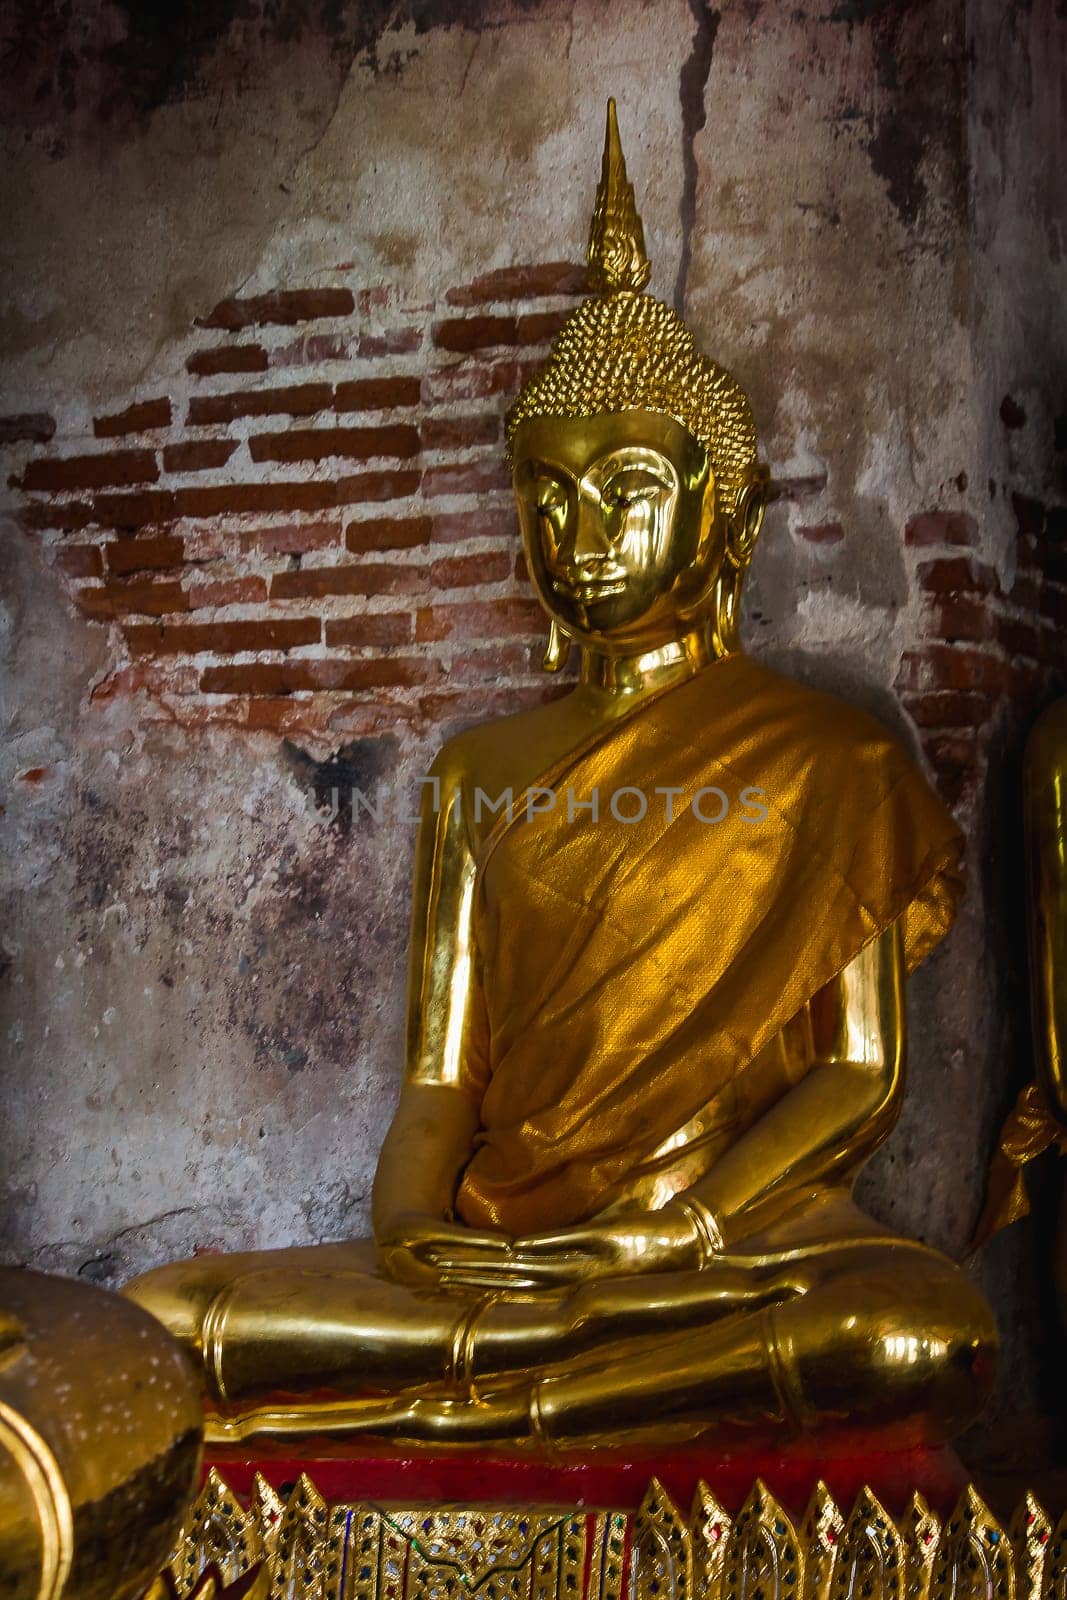 Golden Buddha beside old walls in Thai temples